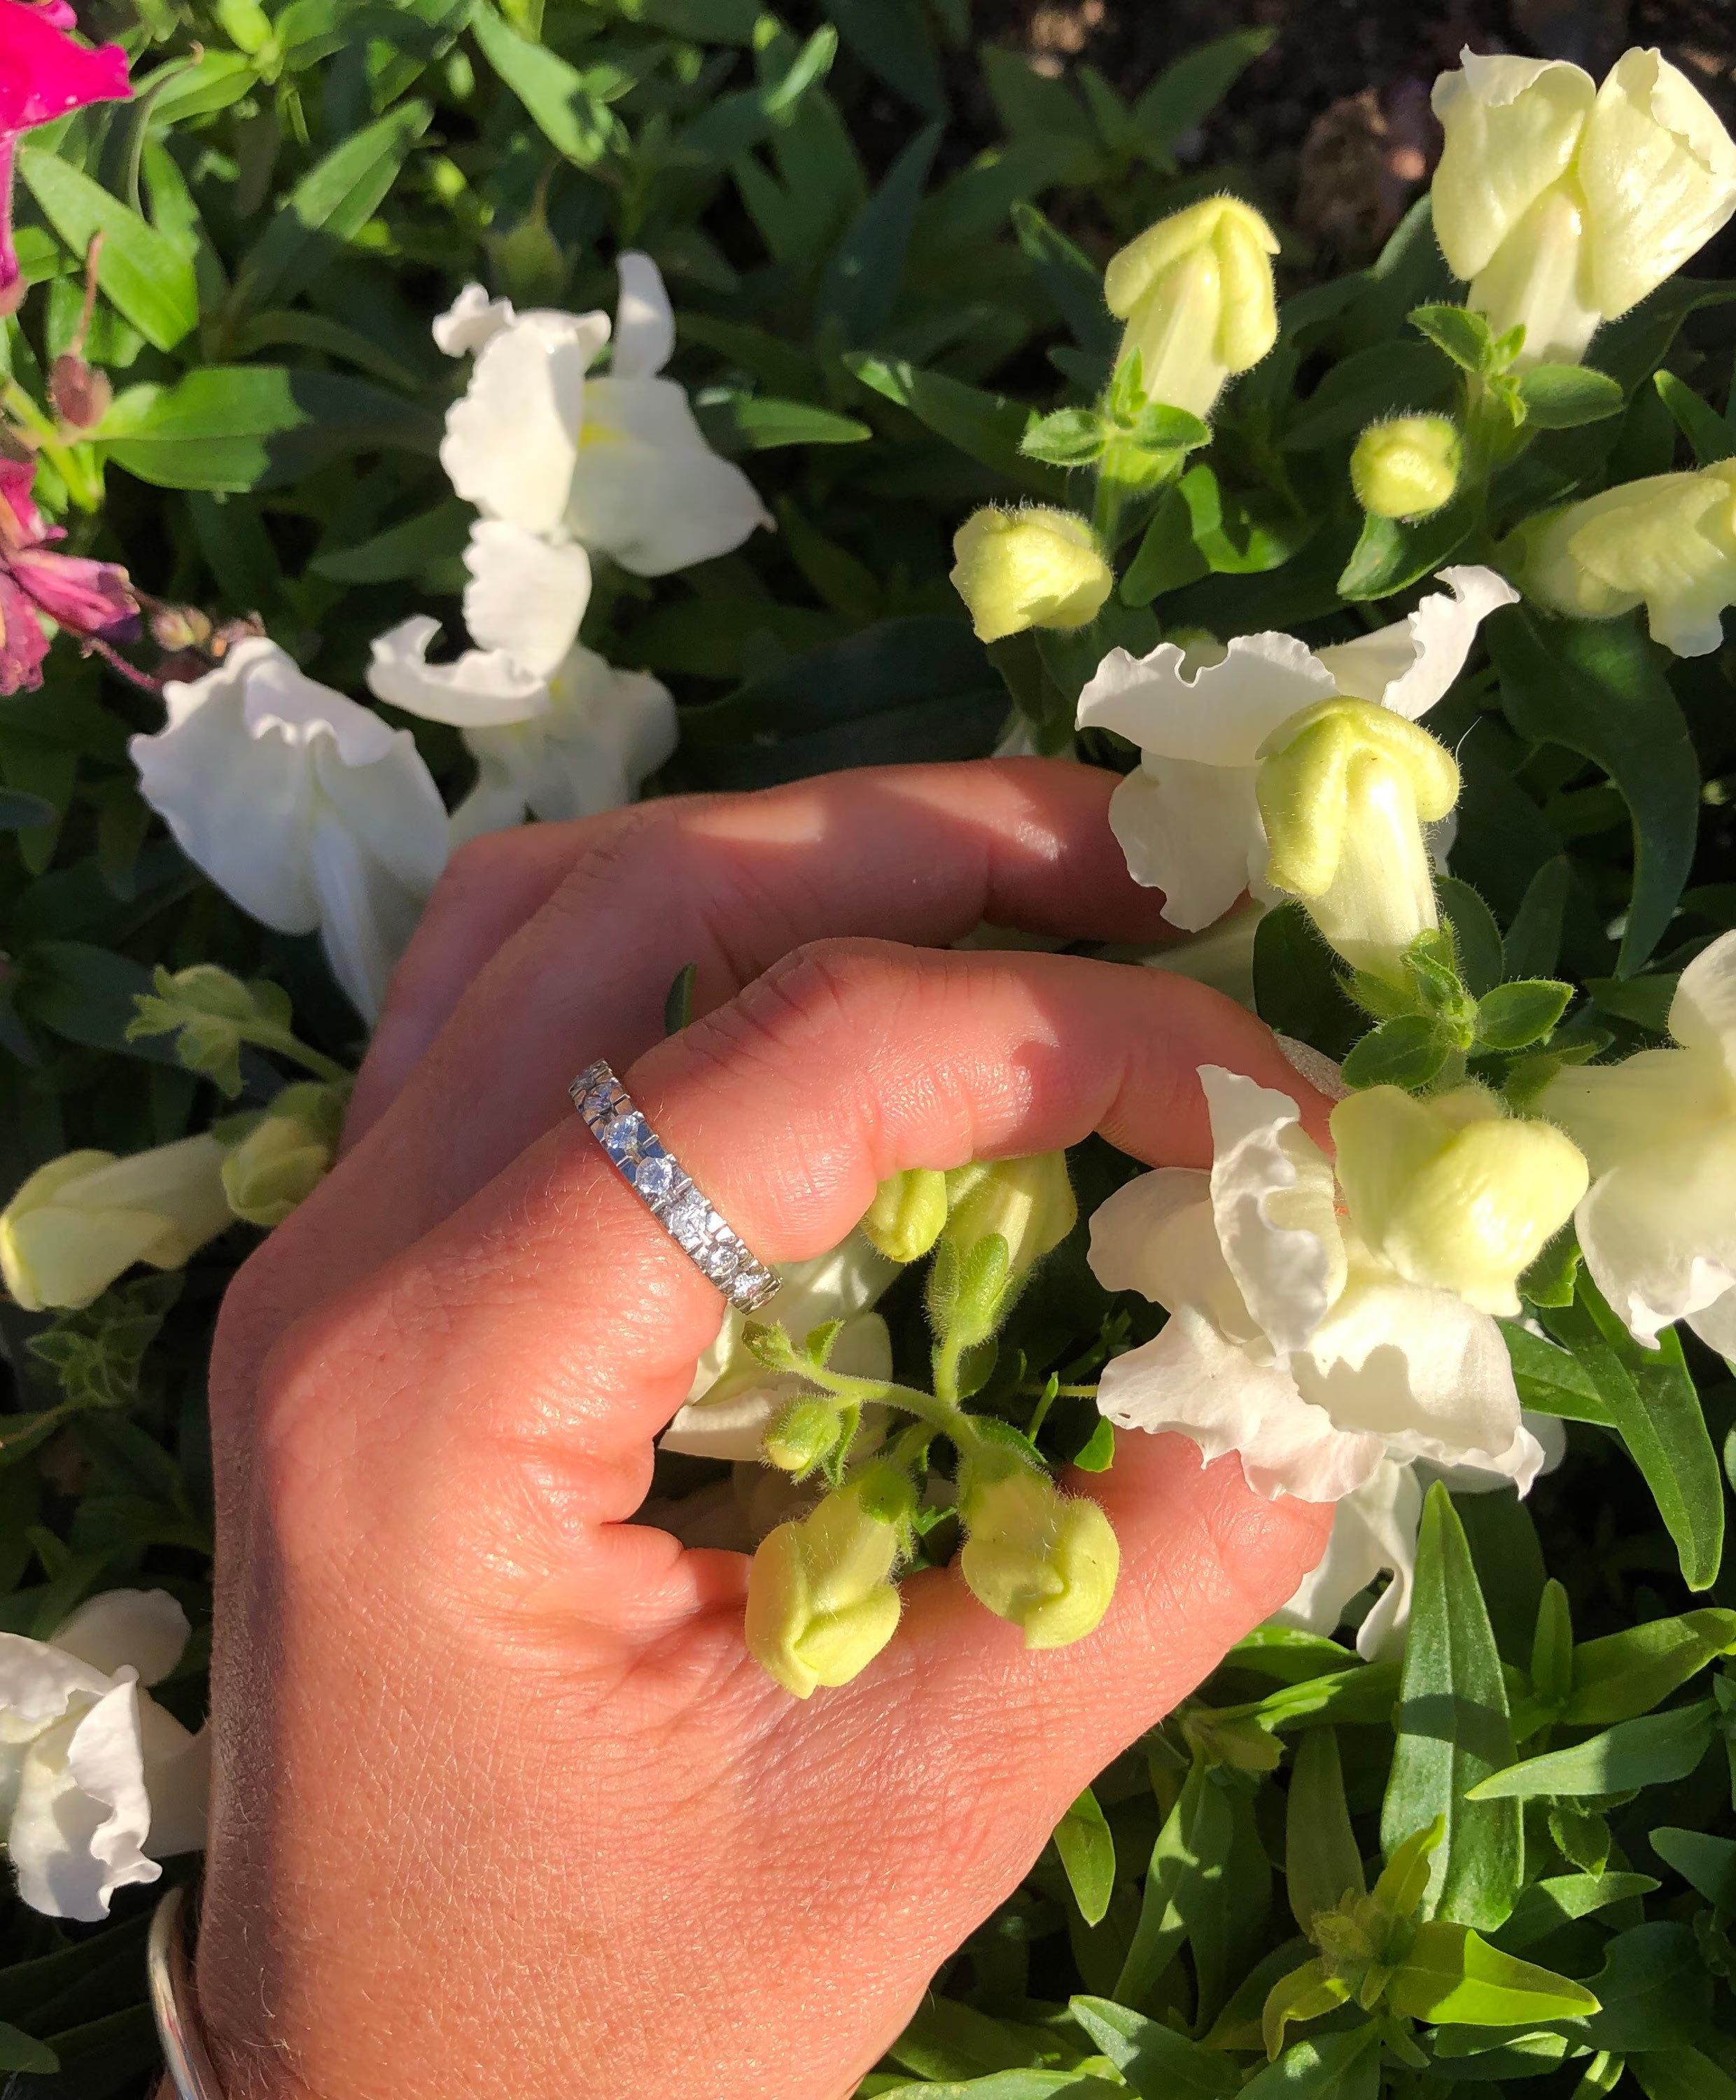 Diamond Eternity Ring

18ct White Gold

Diamond Weight Approx 1.0cts

Weight 4.5g

Size J/K- not sizeable 

All of our items are either Antique, Vintage or Preloved. They are in used condition & may show some signs of age related wear, light surface